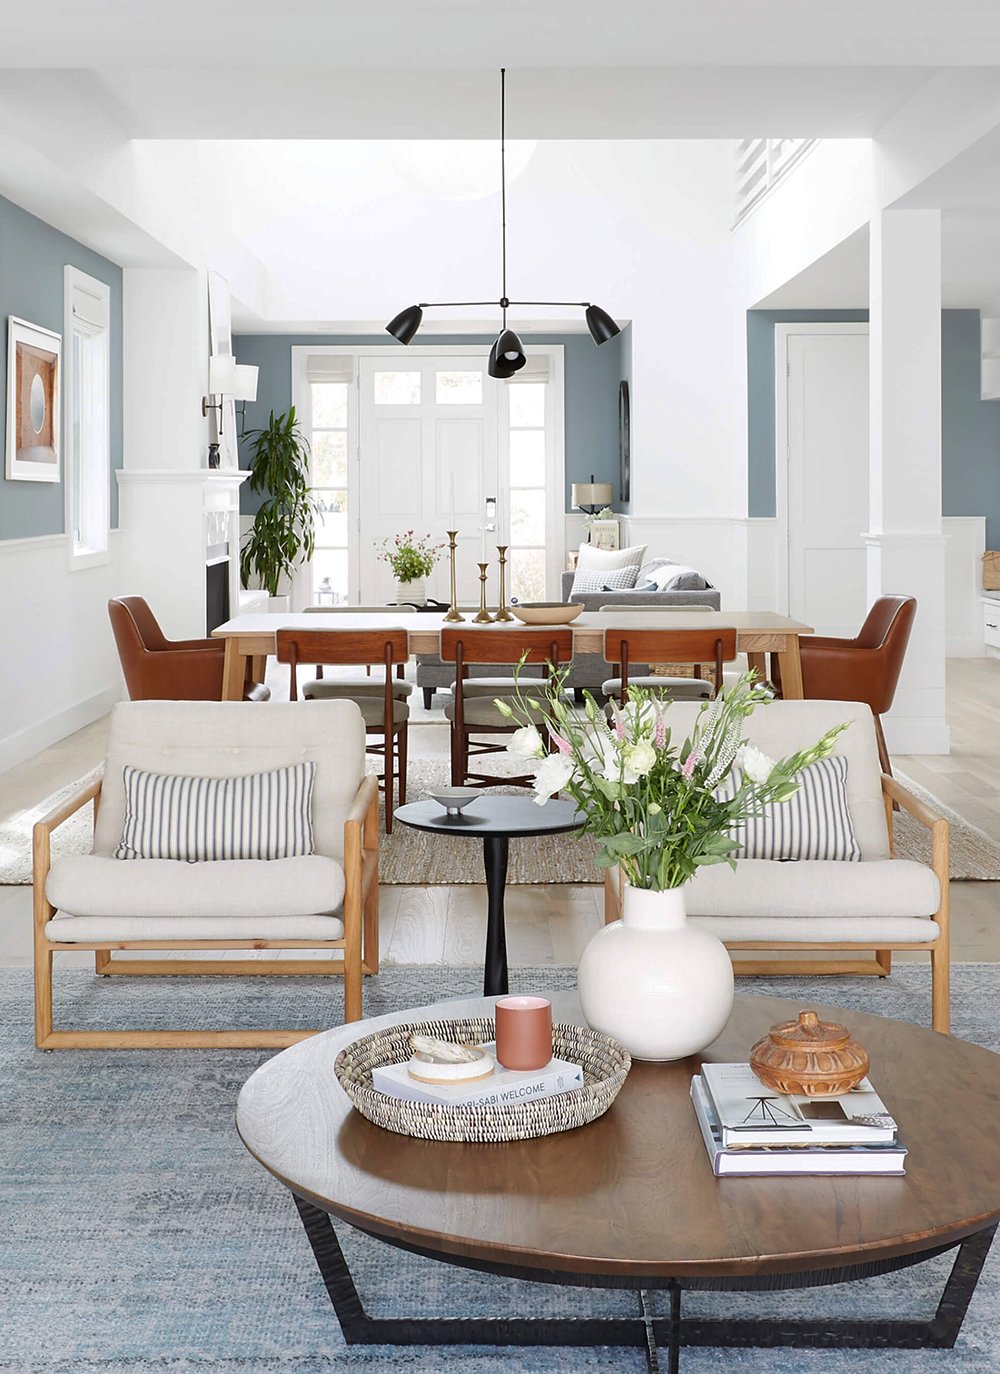 5 Tips for Styling Open Concept Spaces - roomfortuesday.com